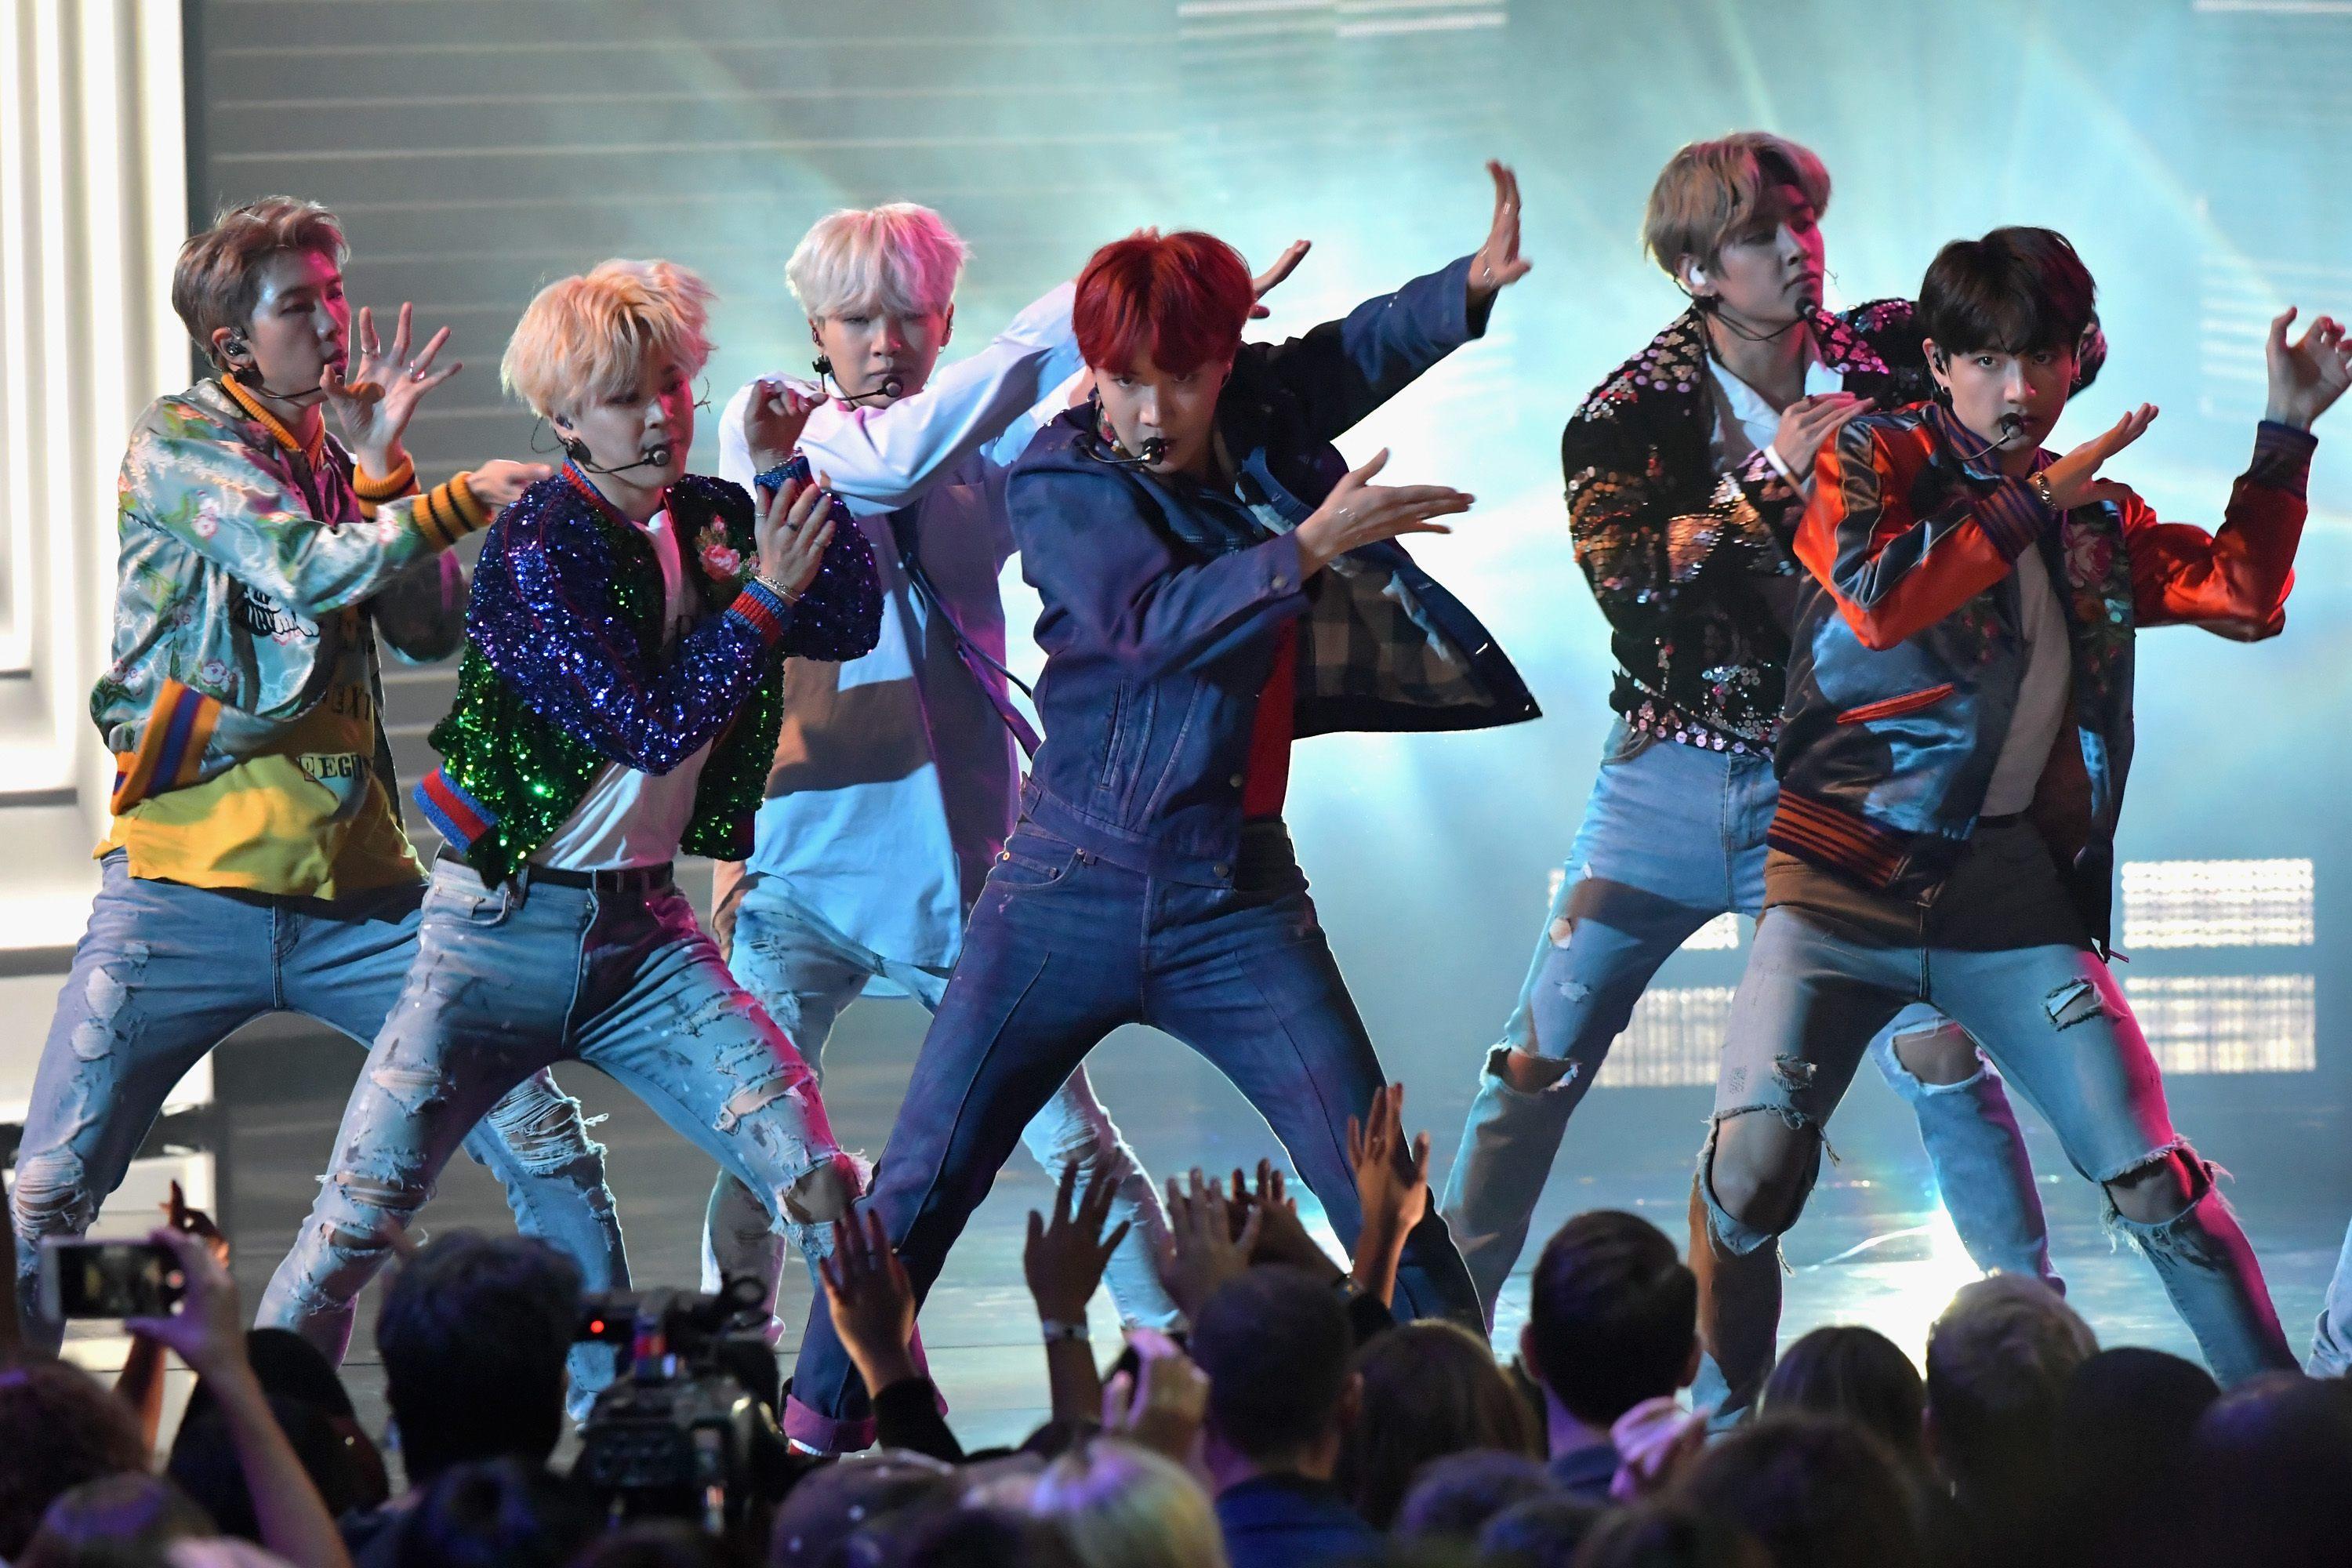 BTS' Best Moments at the American Music Awards - From Dancing to